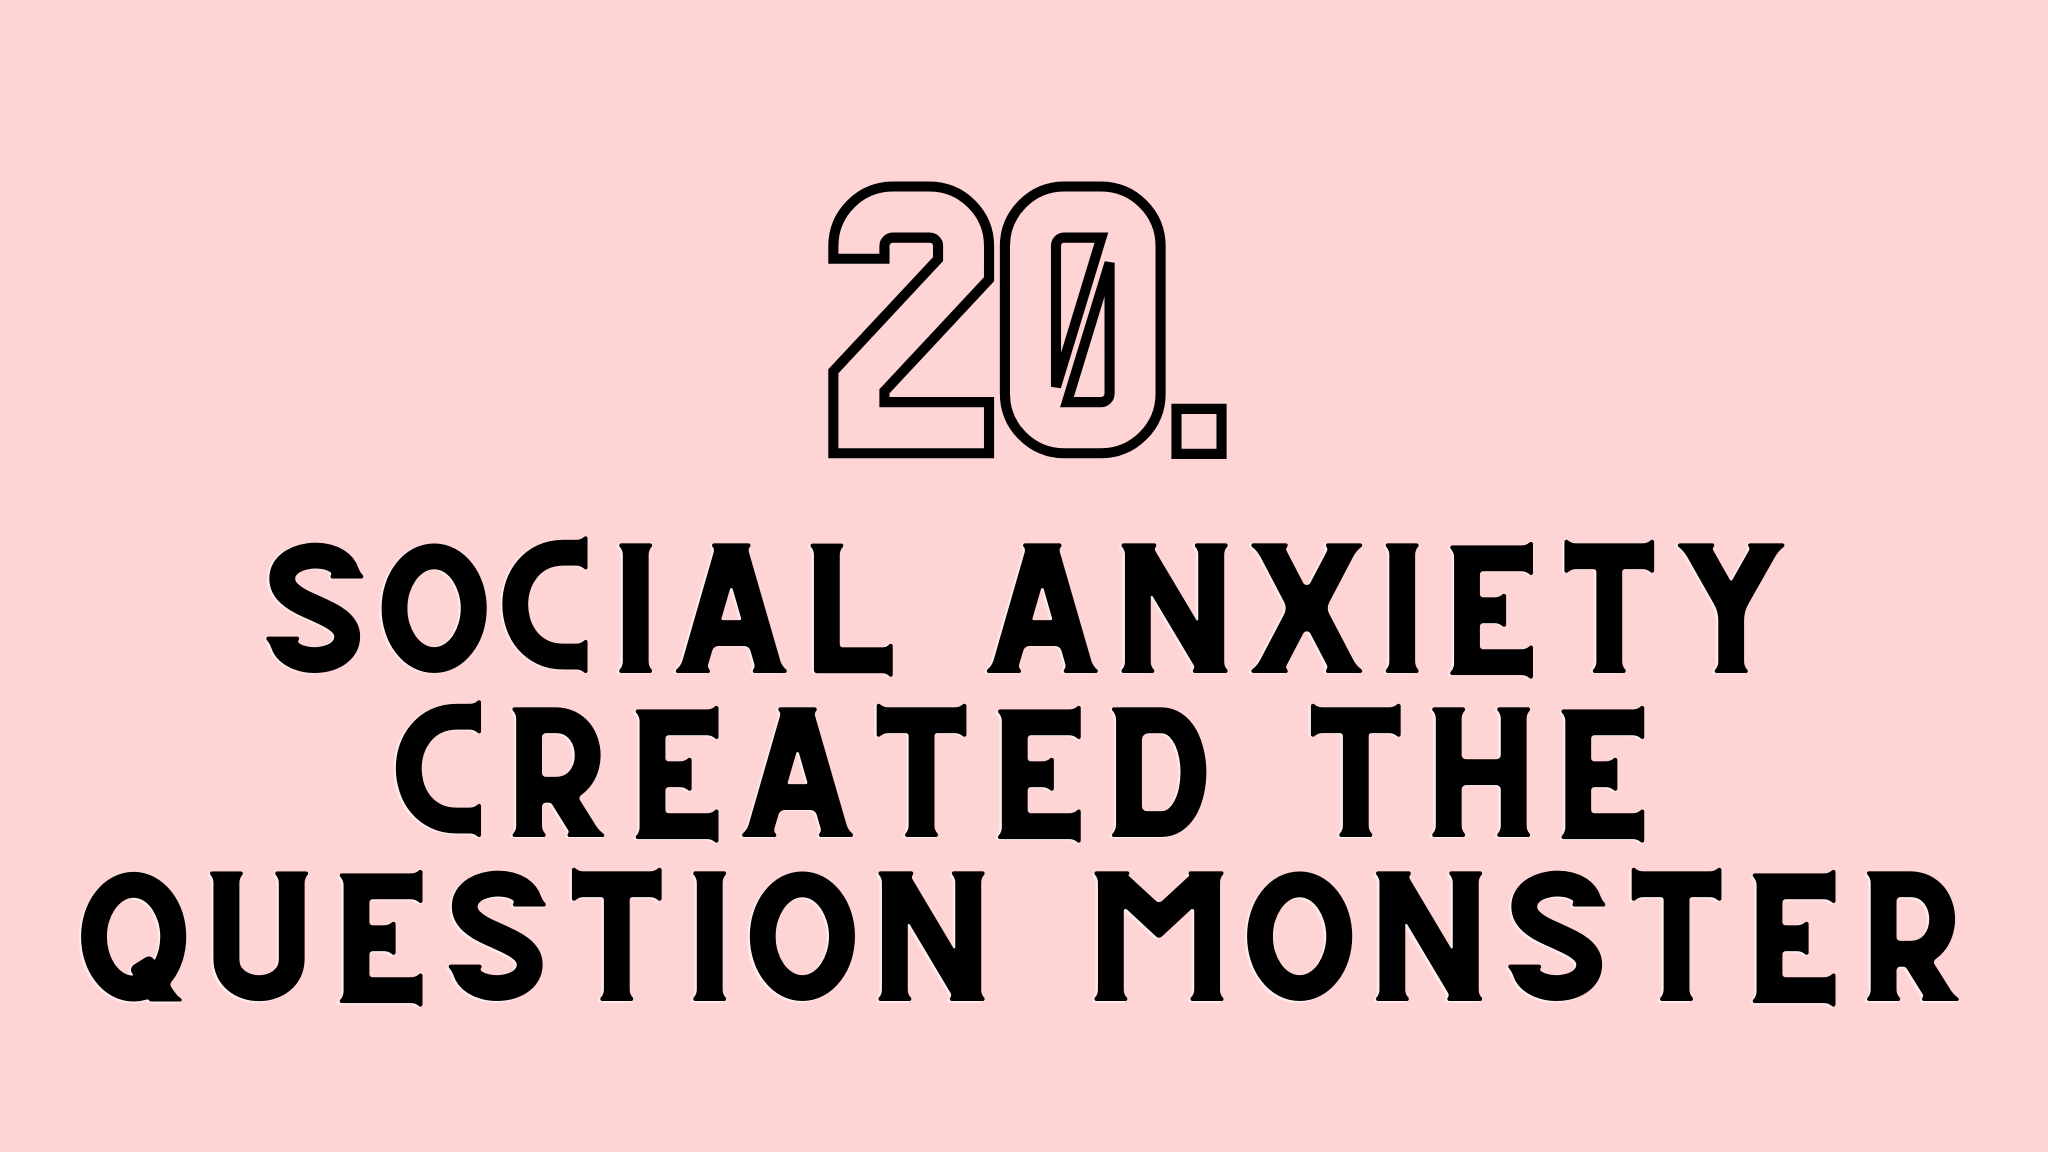 Social Anxiety Created The Question Monster - HonestRox